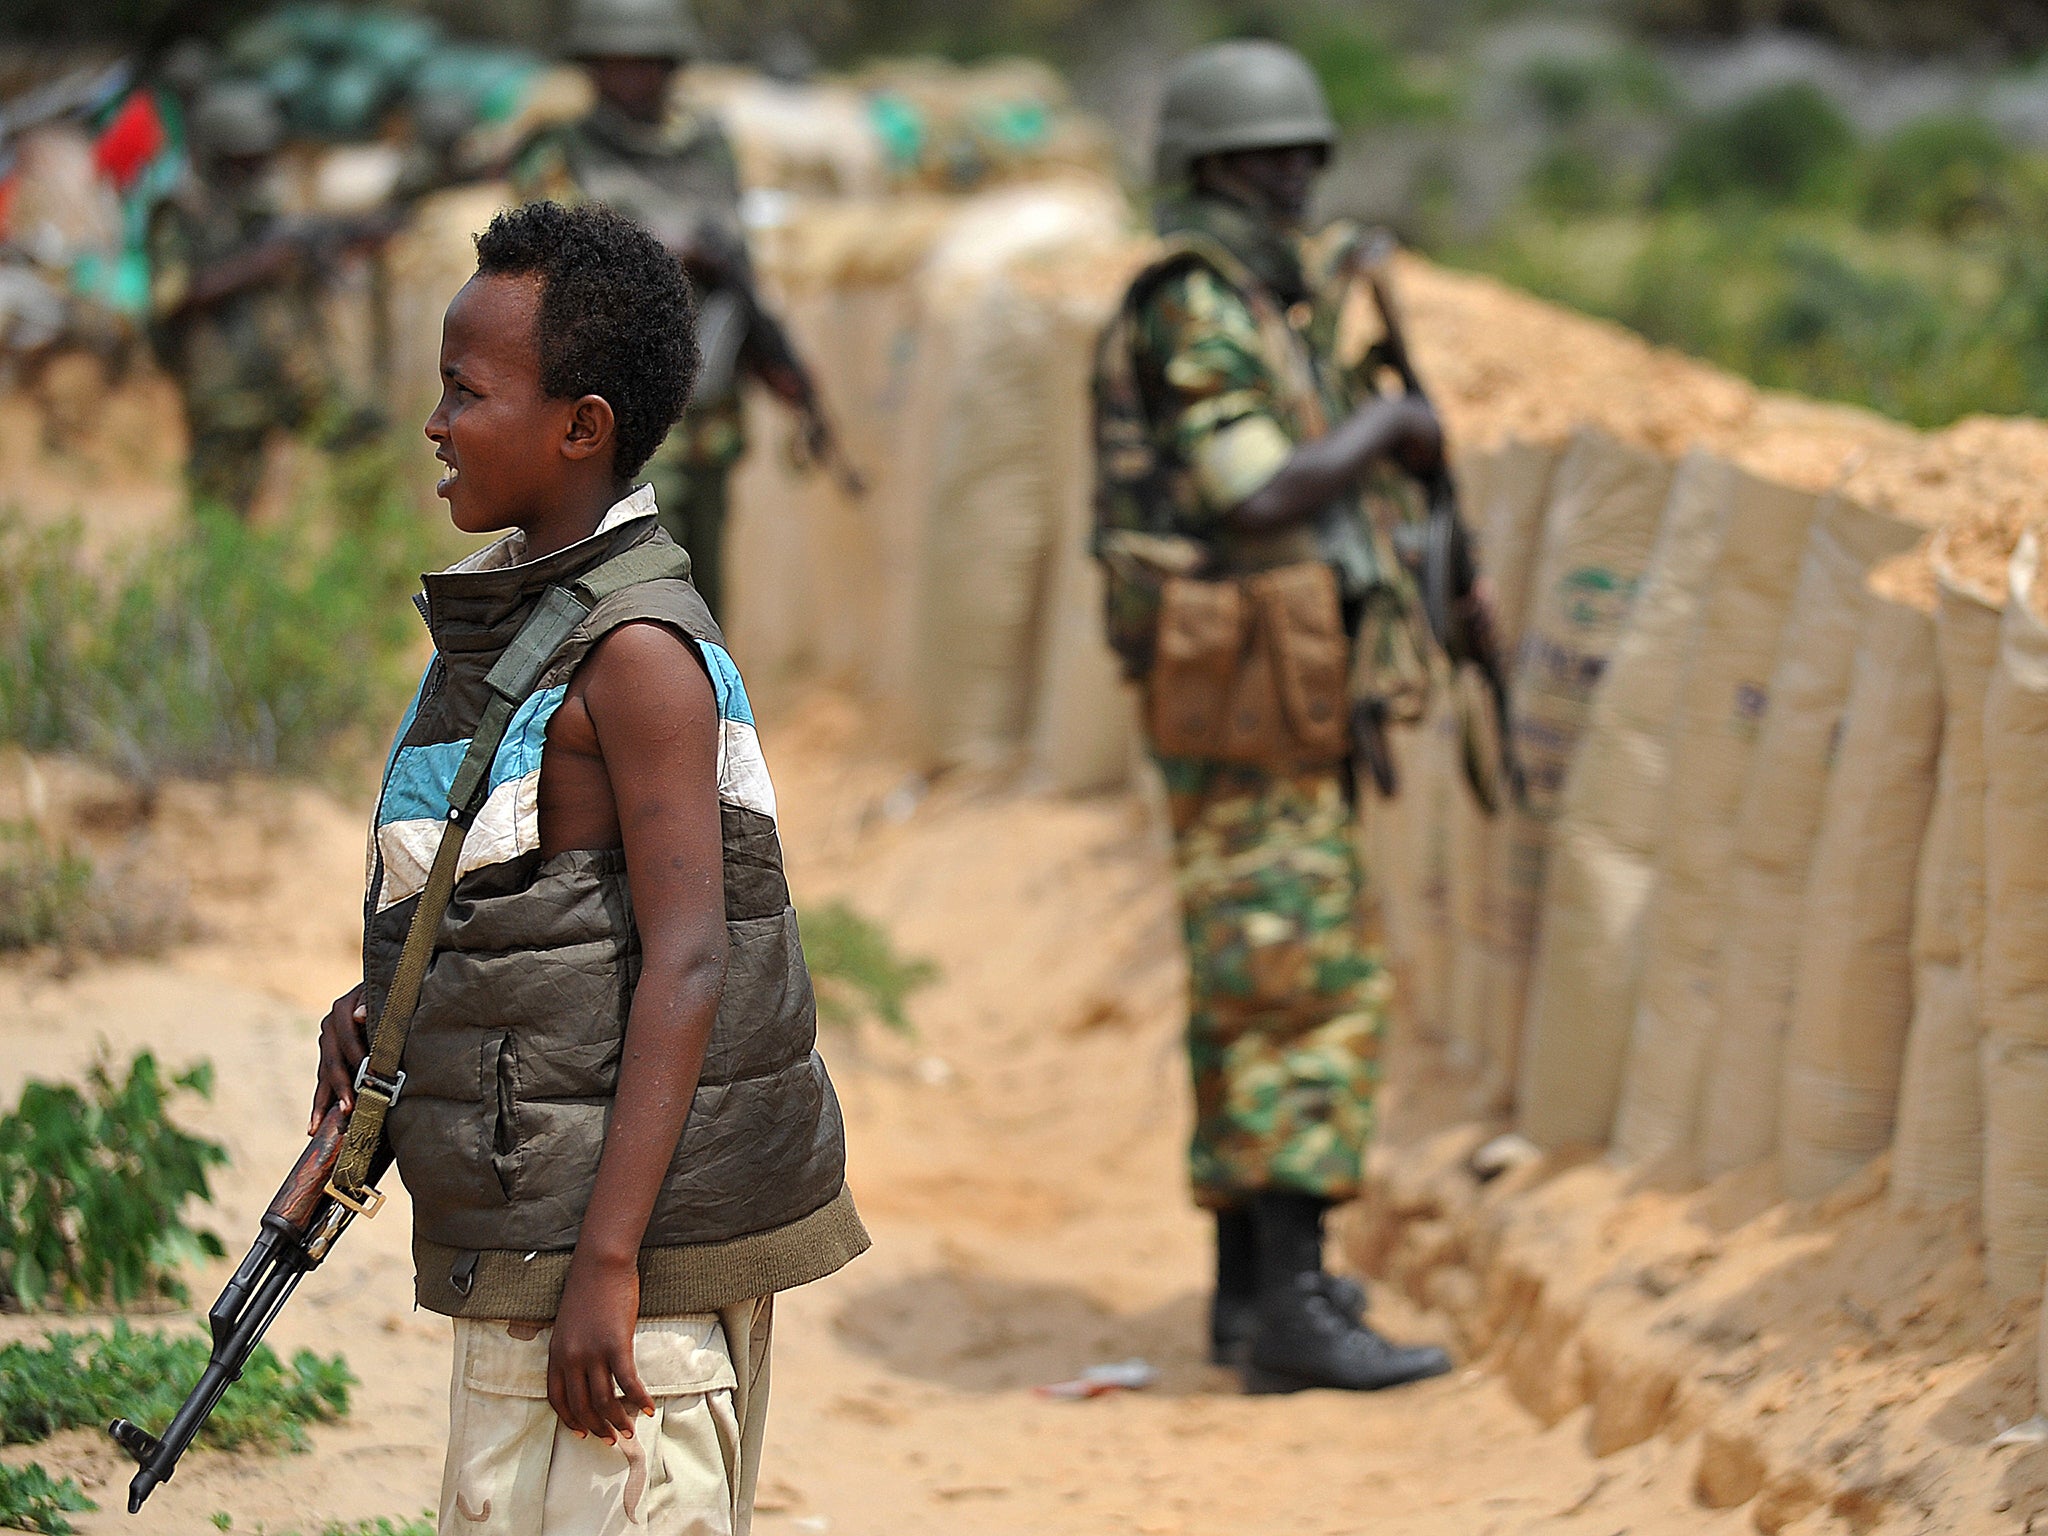 Aid agencies now estimate that there are around 300,000 children involved with armed groups worldwide